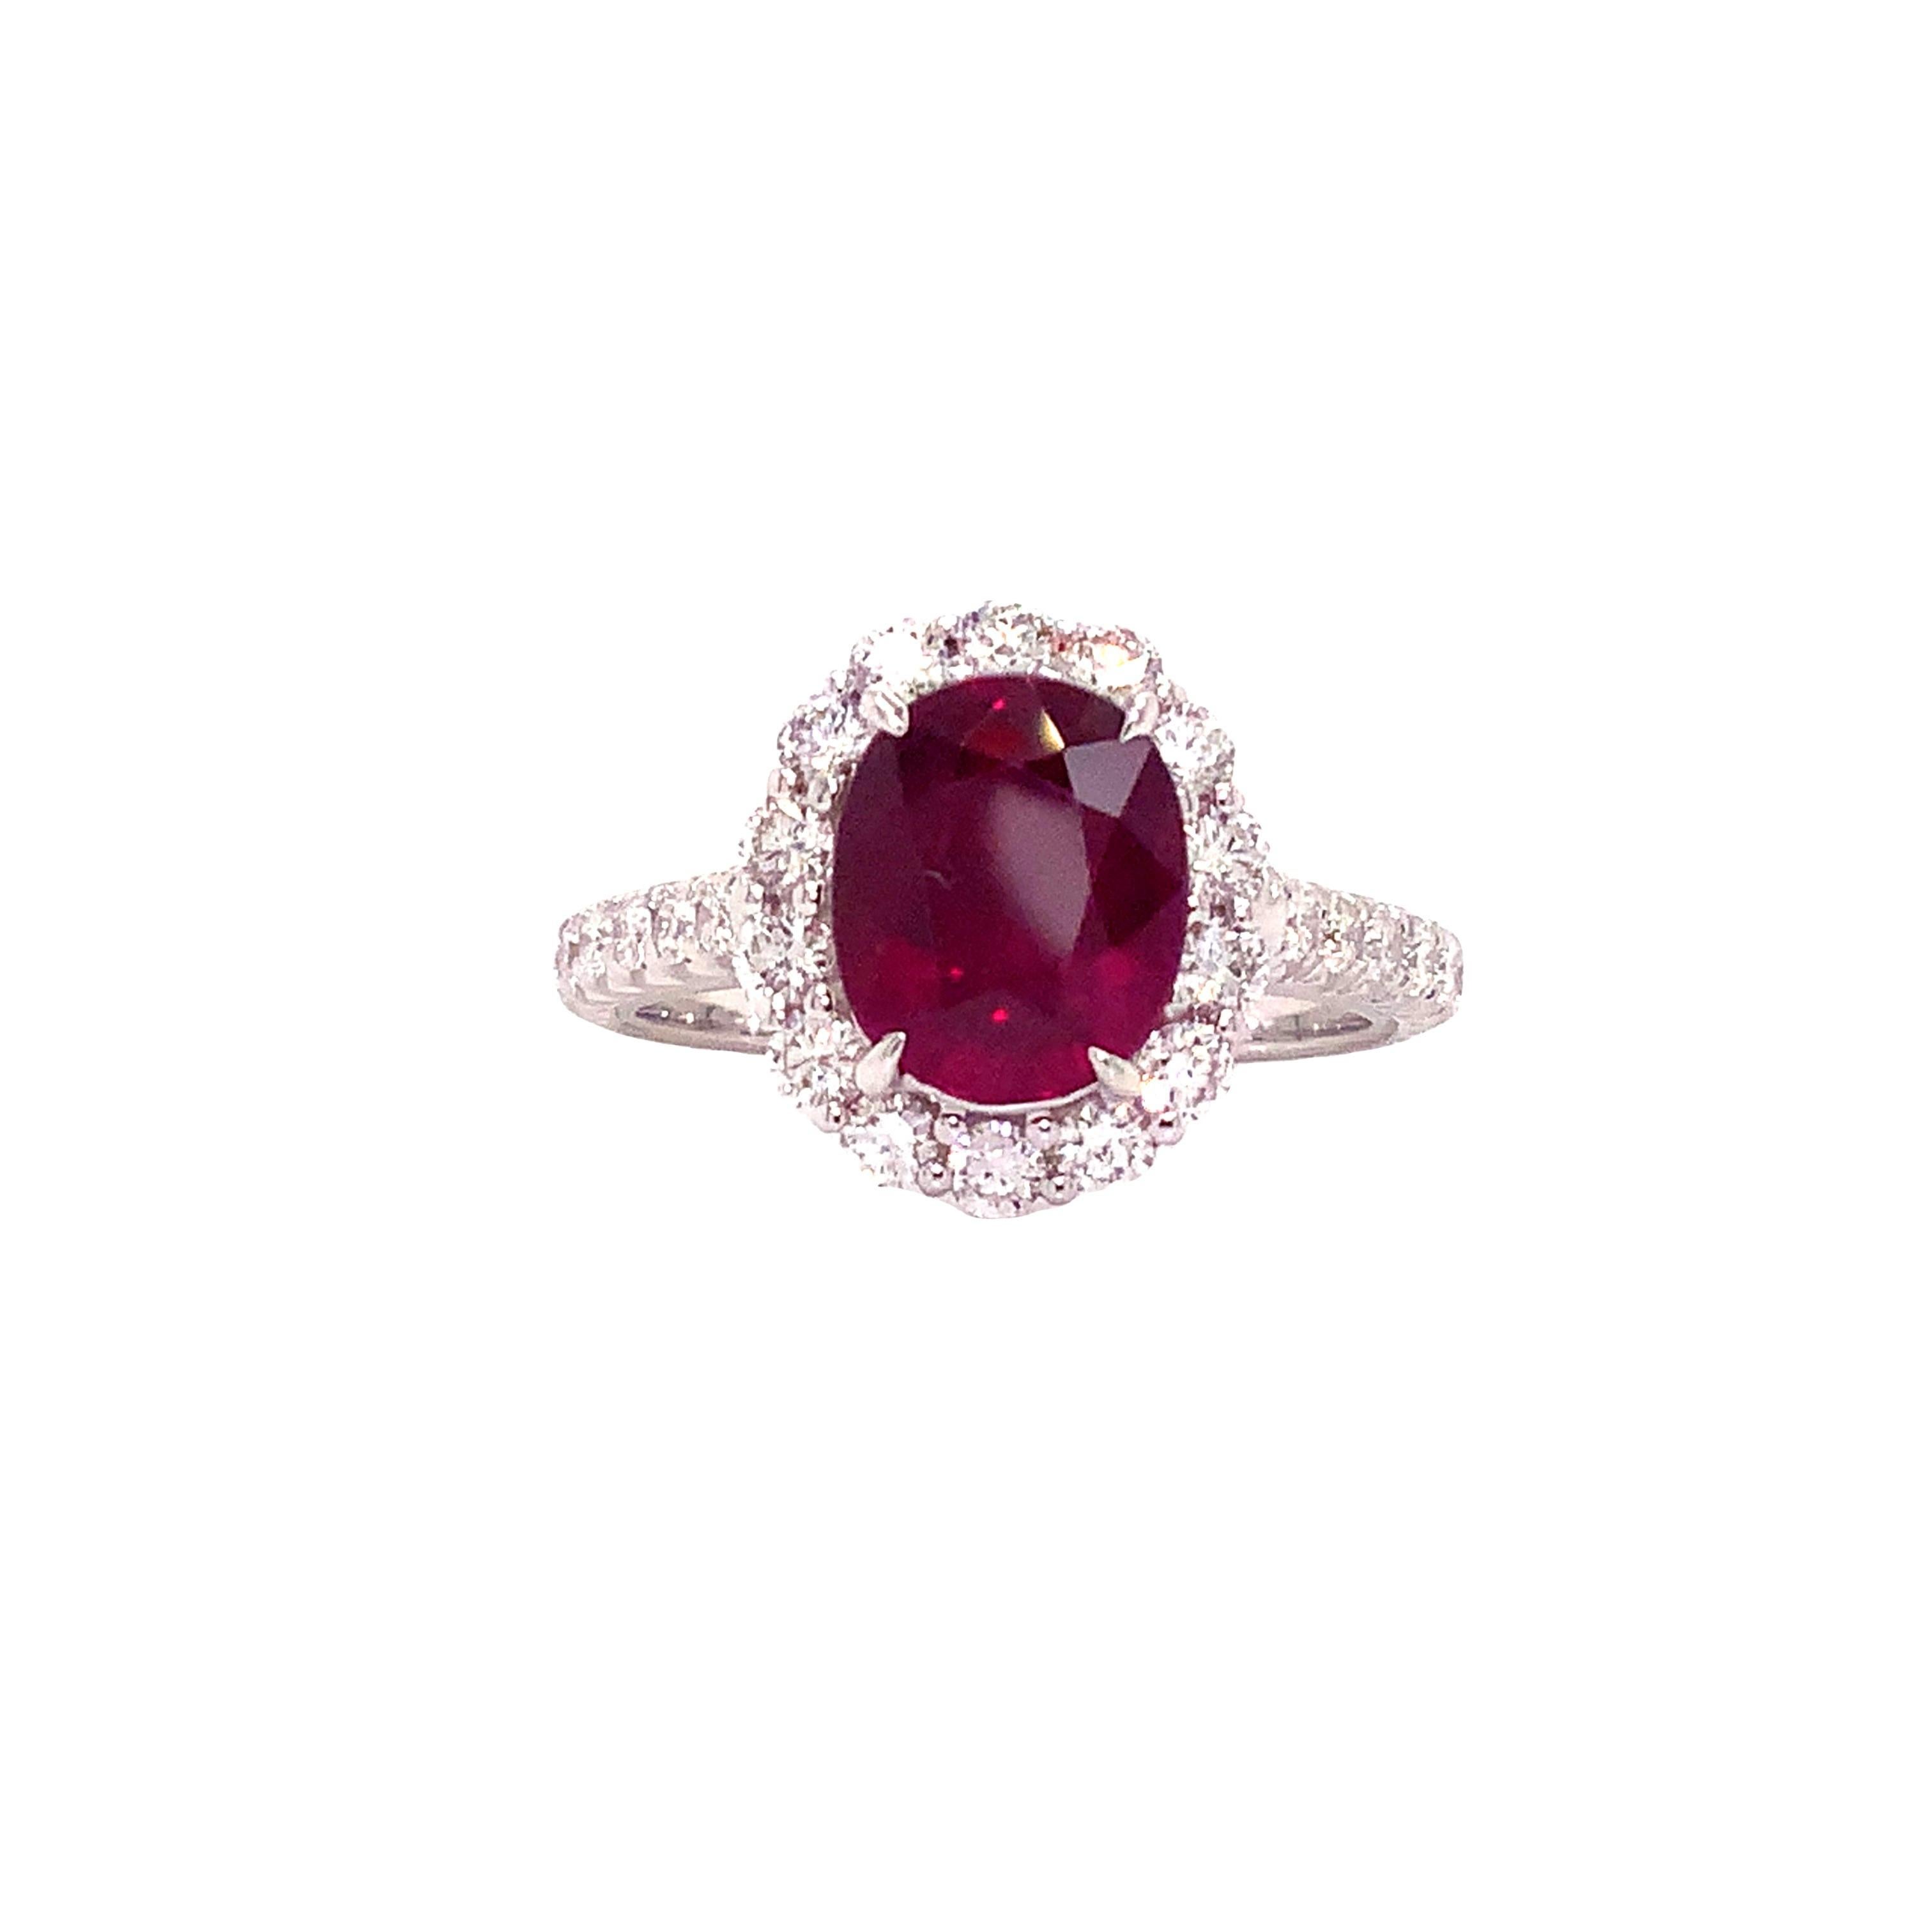 Victorian Roman + Jules Classic 2.52 Carat Gem Quality Red Ruby and Diamond Halo Ring For Sale